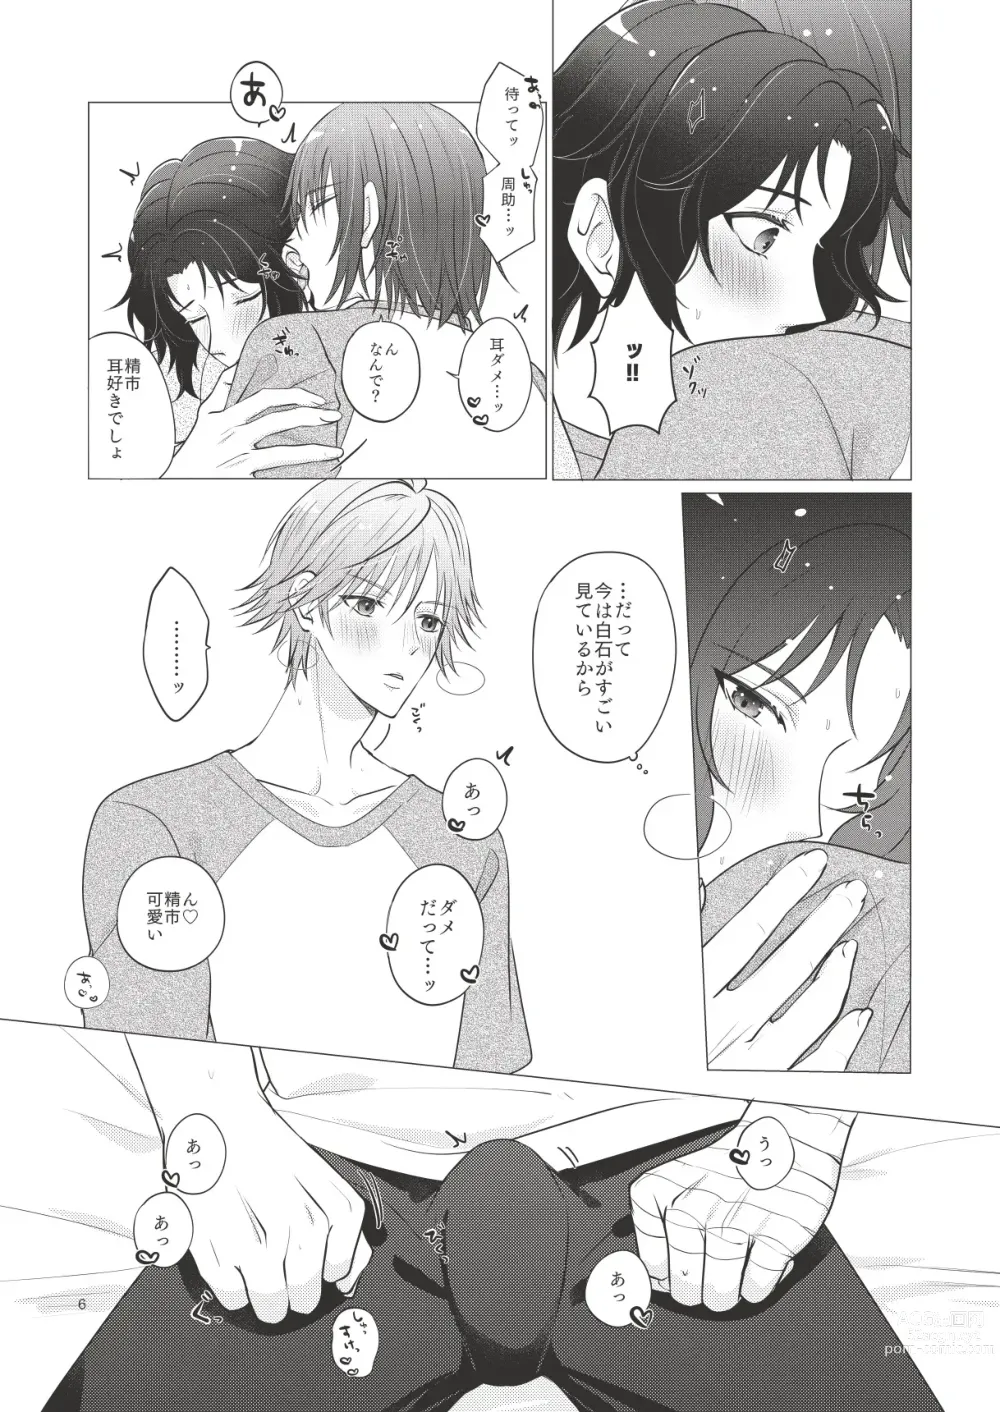 Page 5 of doujinshi Bonds of affection